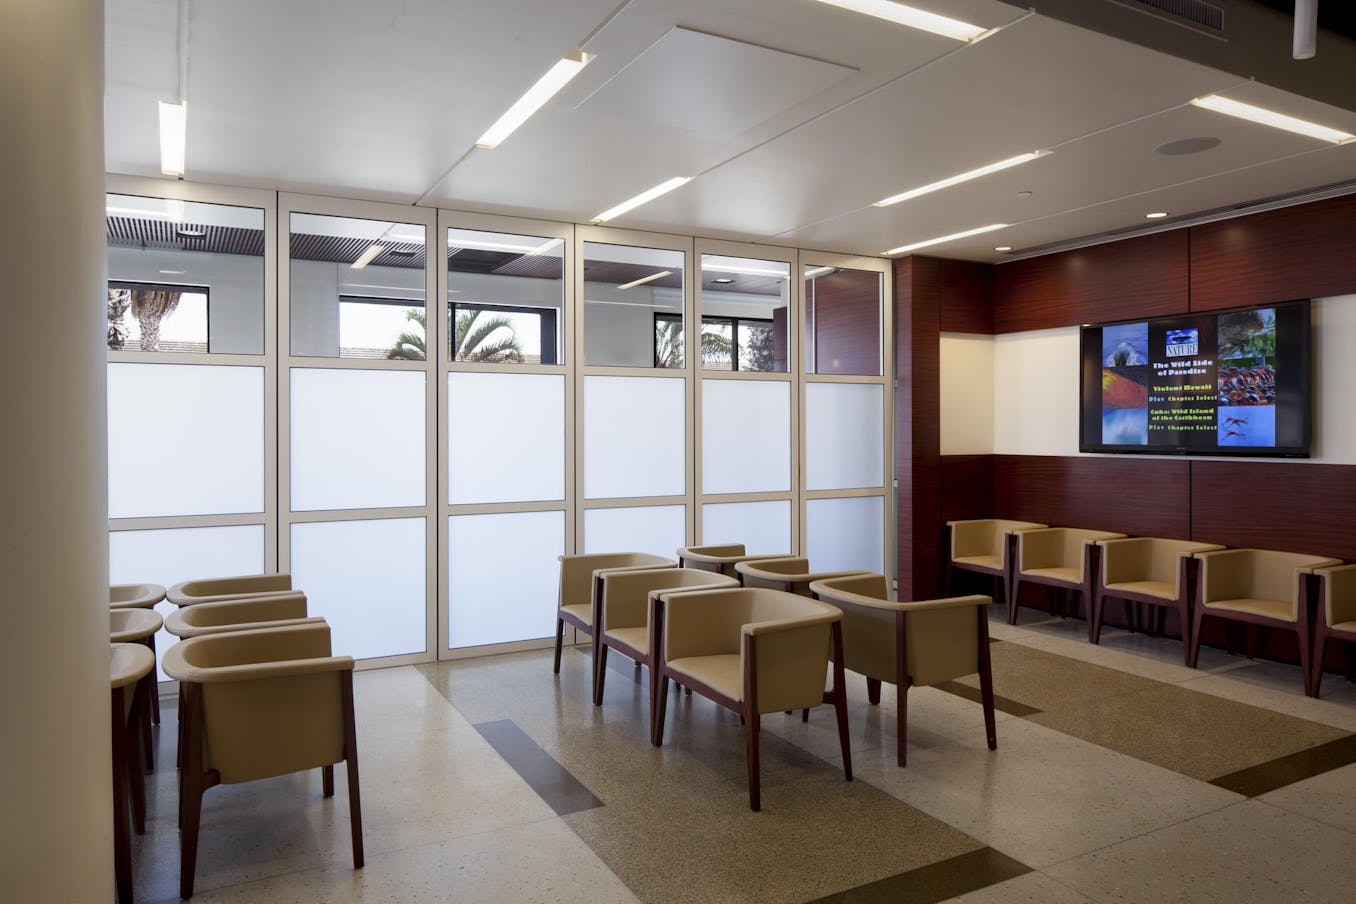 UCLA spine center waiting room with half frosted folding glass walls